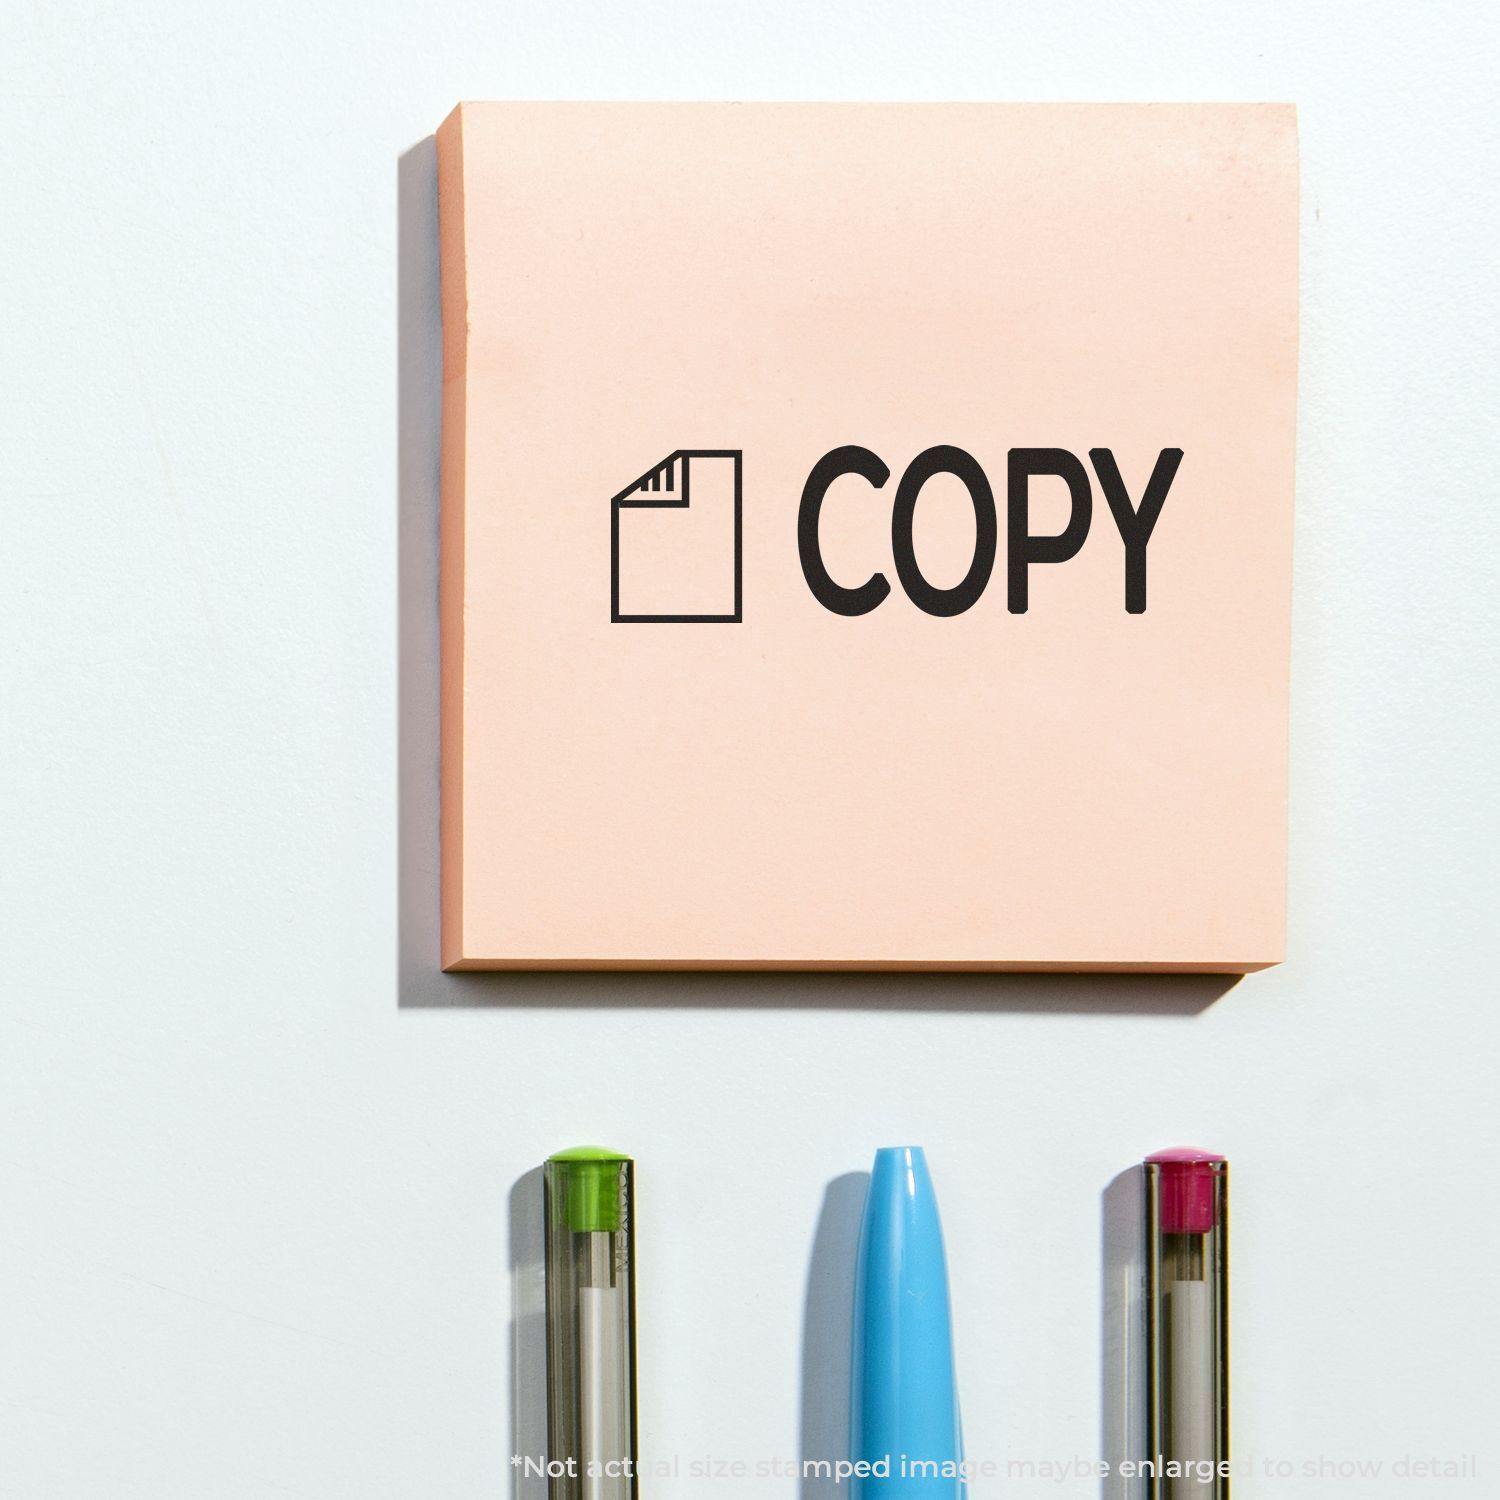 A stock office pre-inked stamp with a stamped image showing how the text "COPY" in a bold font and a small image of a letter on the left is displayed after stamping.